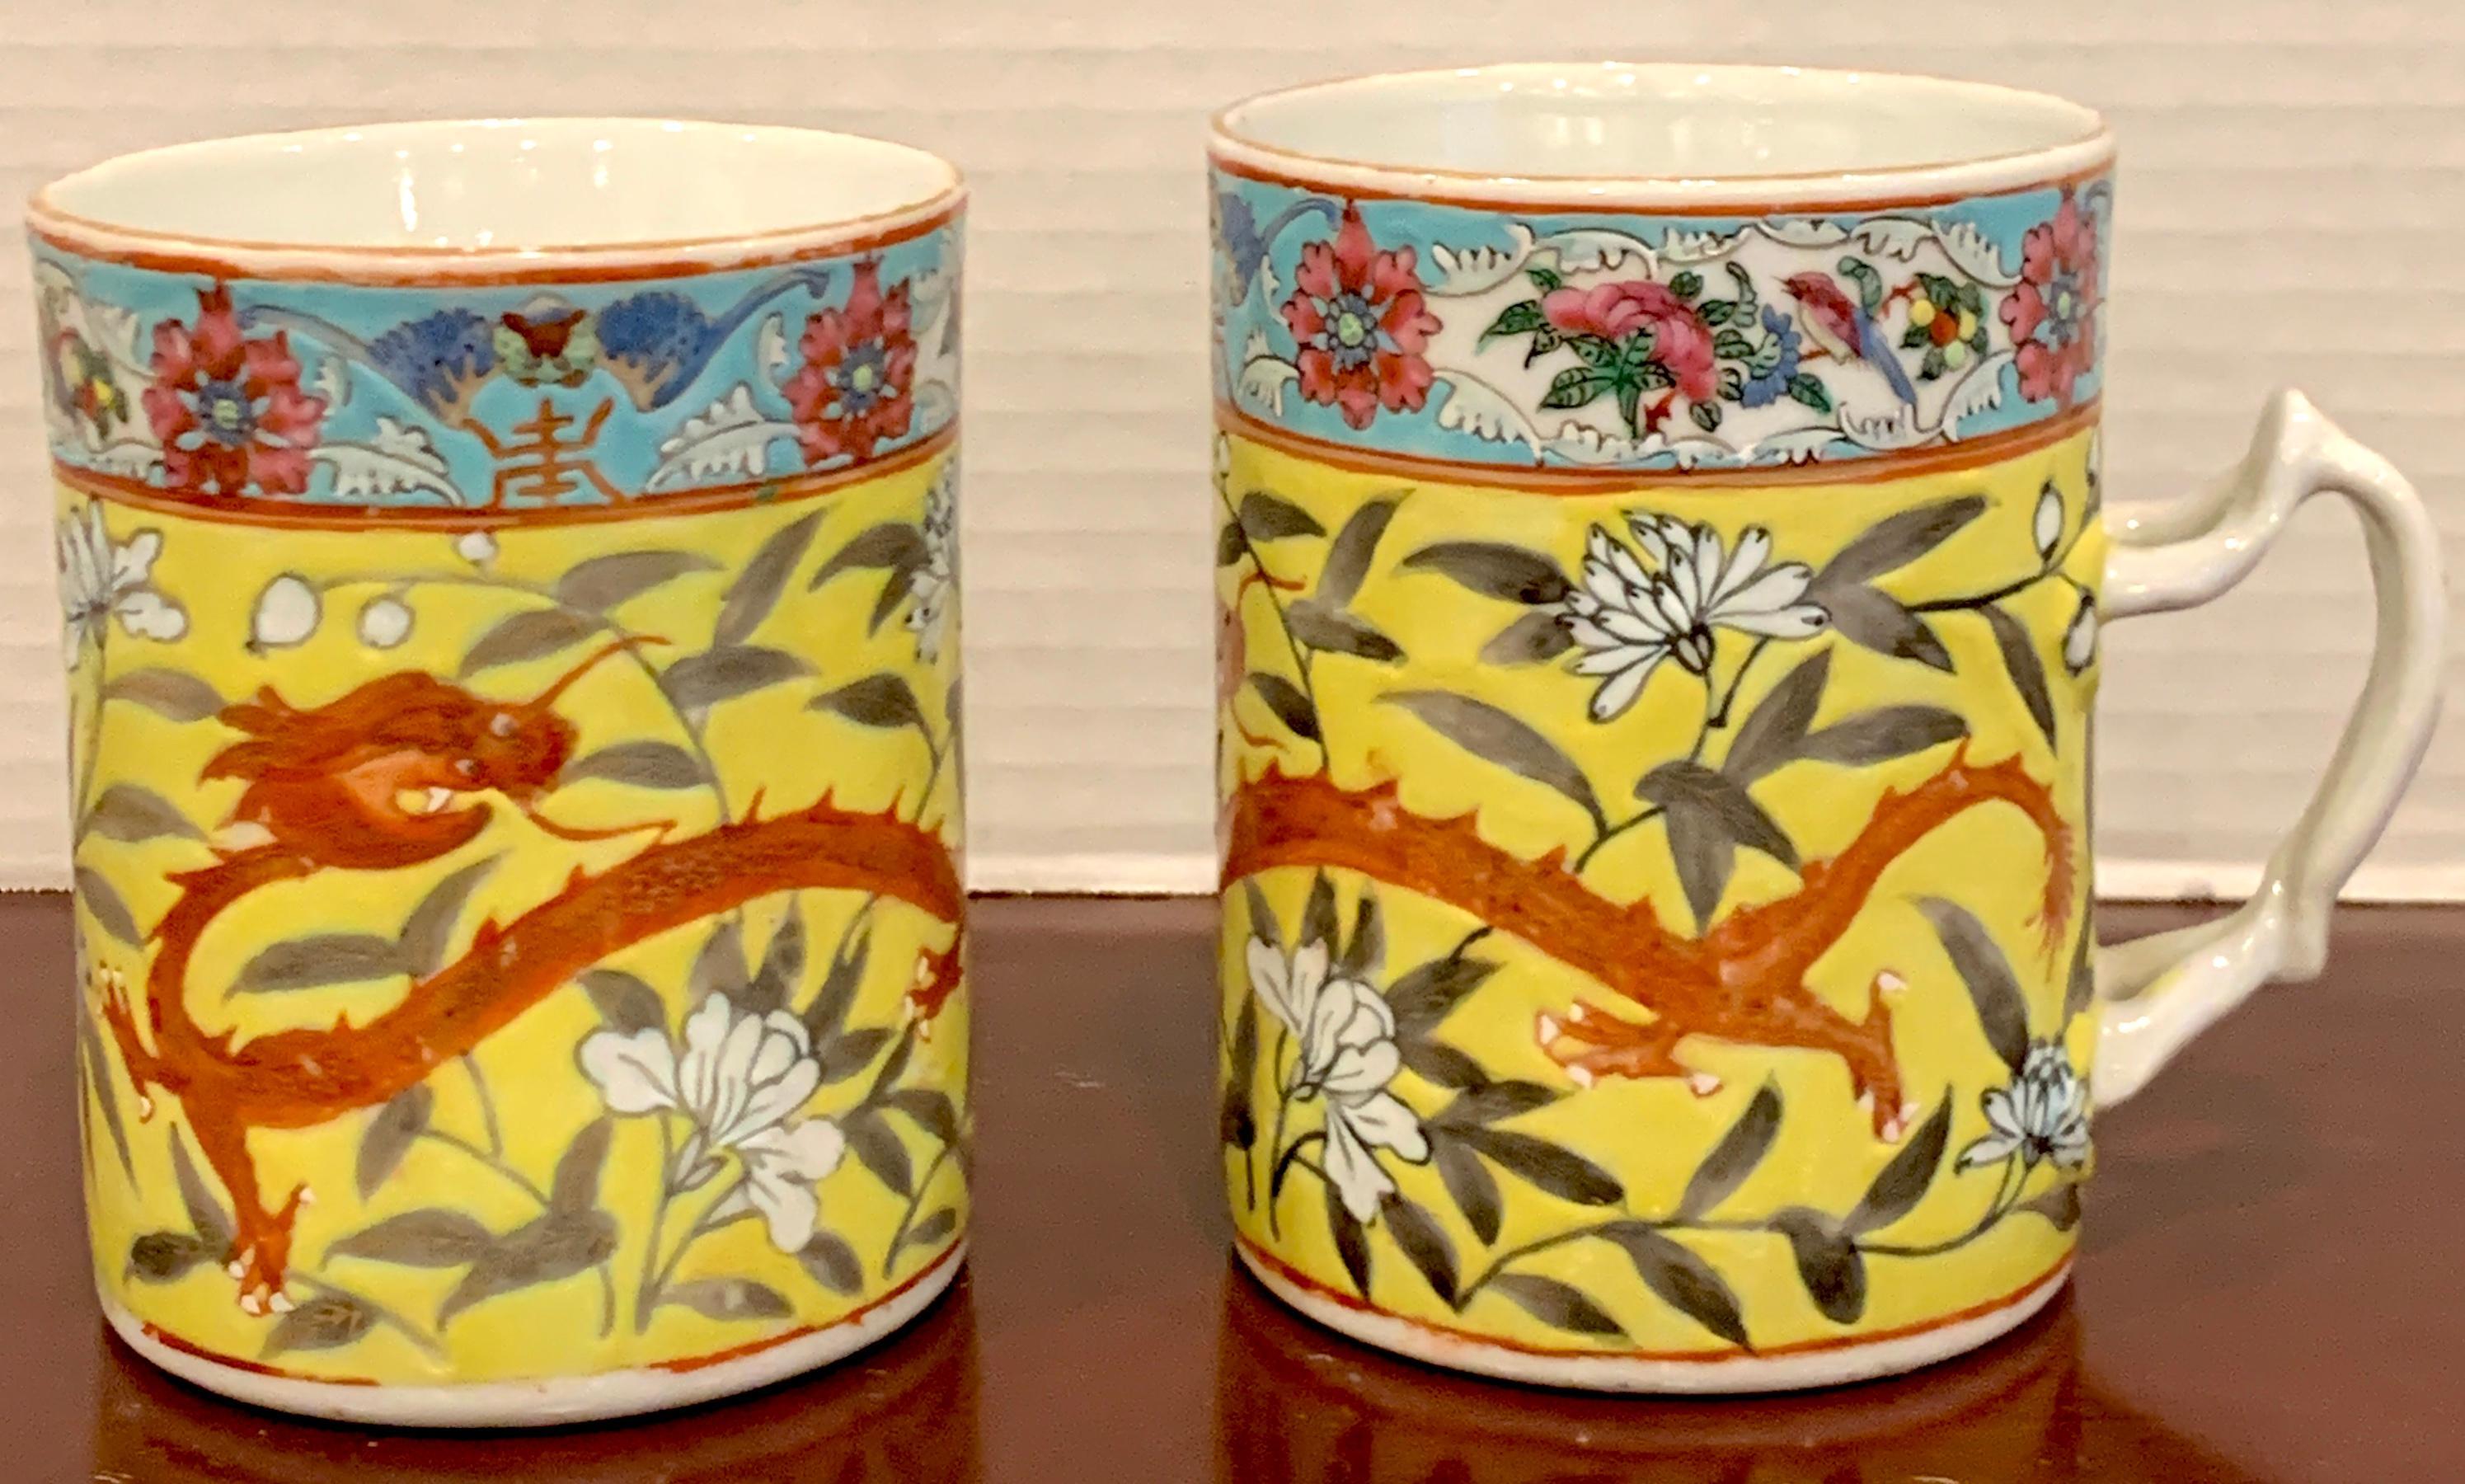 Pair of 19th century Chinese Export Famille Verte yellow Dragon motif mugs, Each one decorated with a four toed dragon within a yellow floral background. Each one measures 4.75